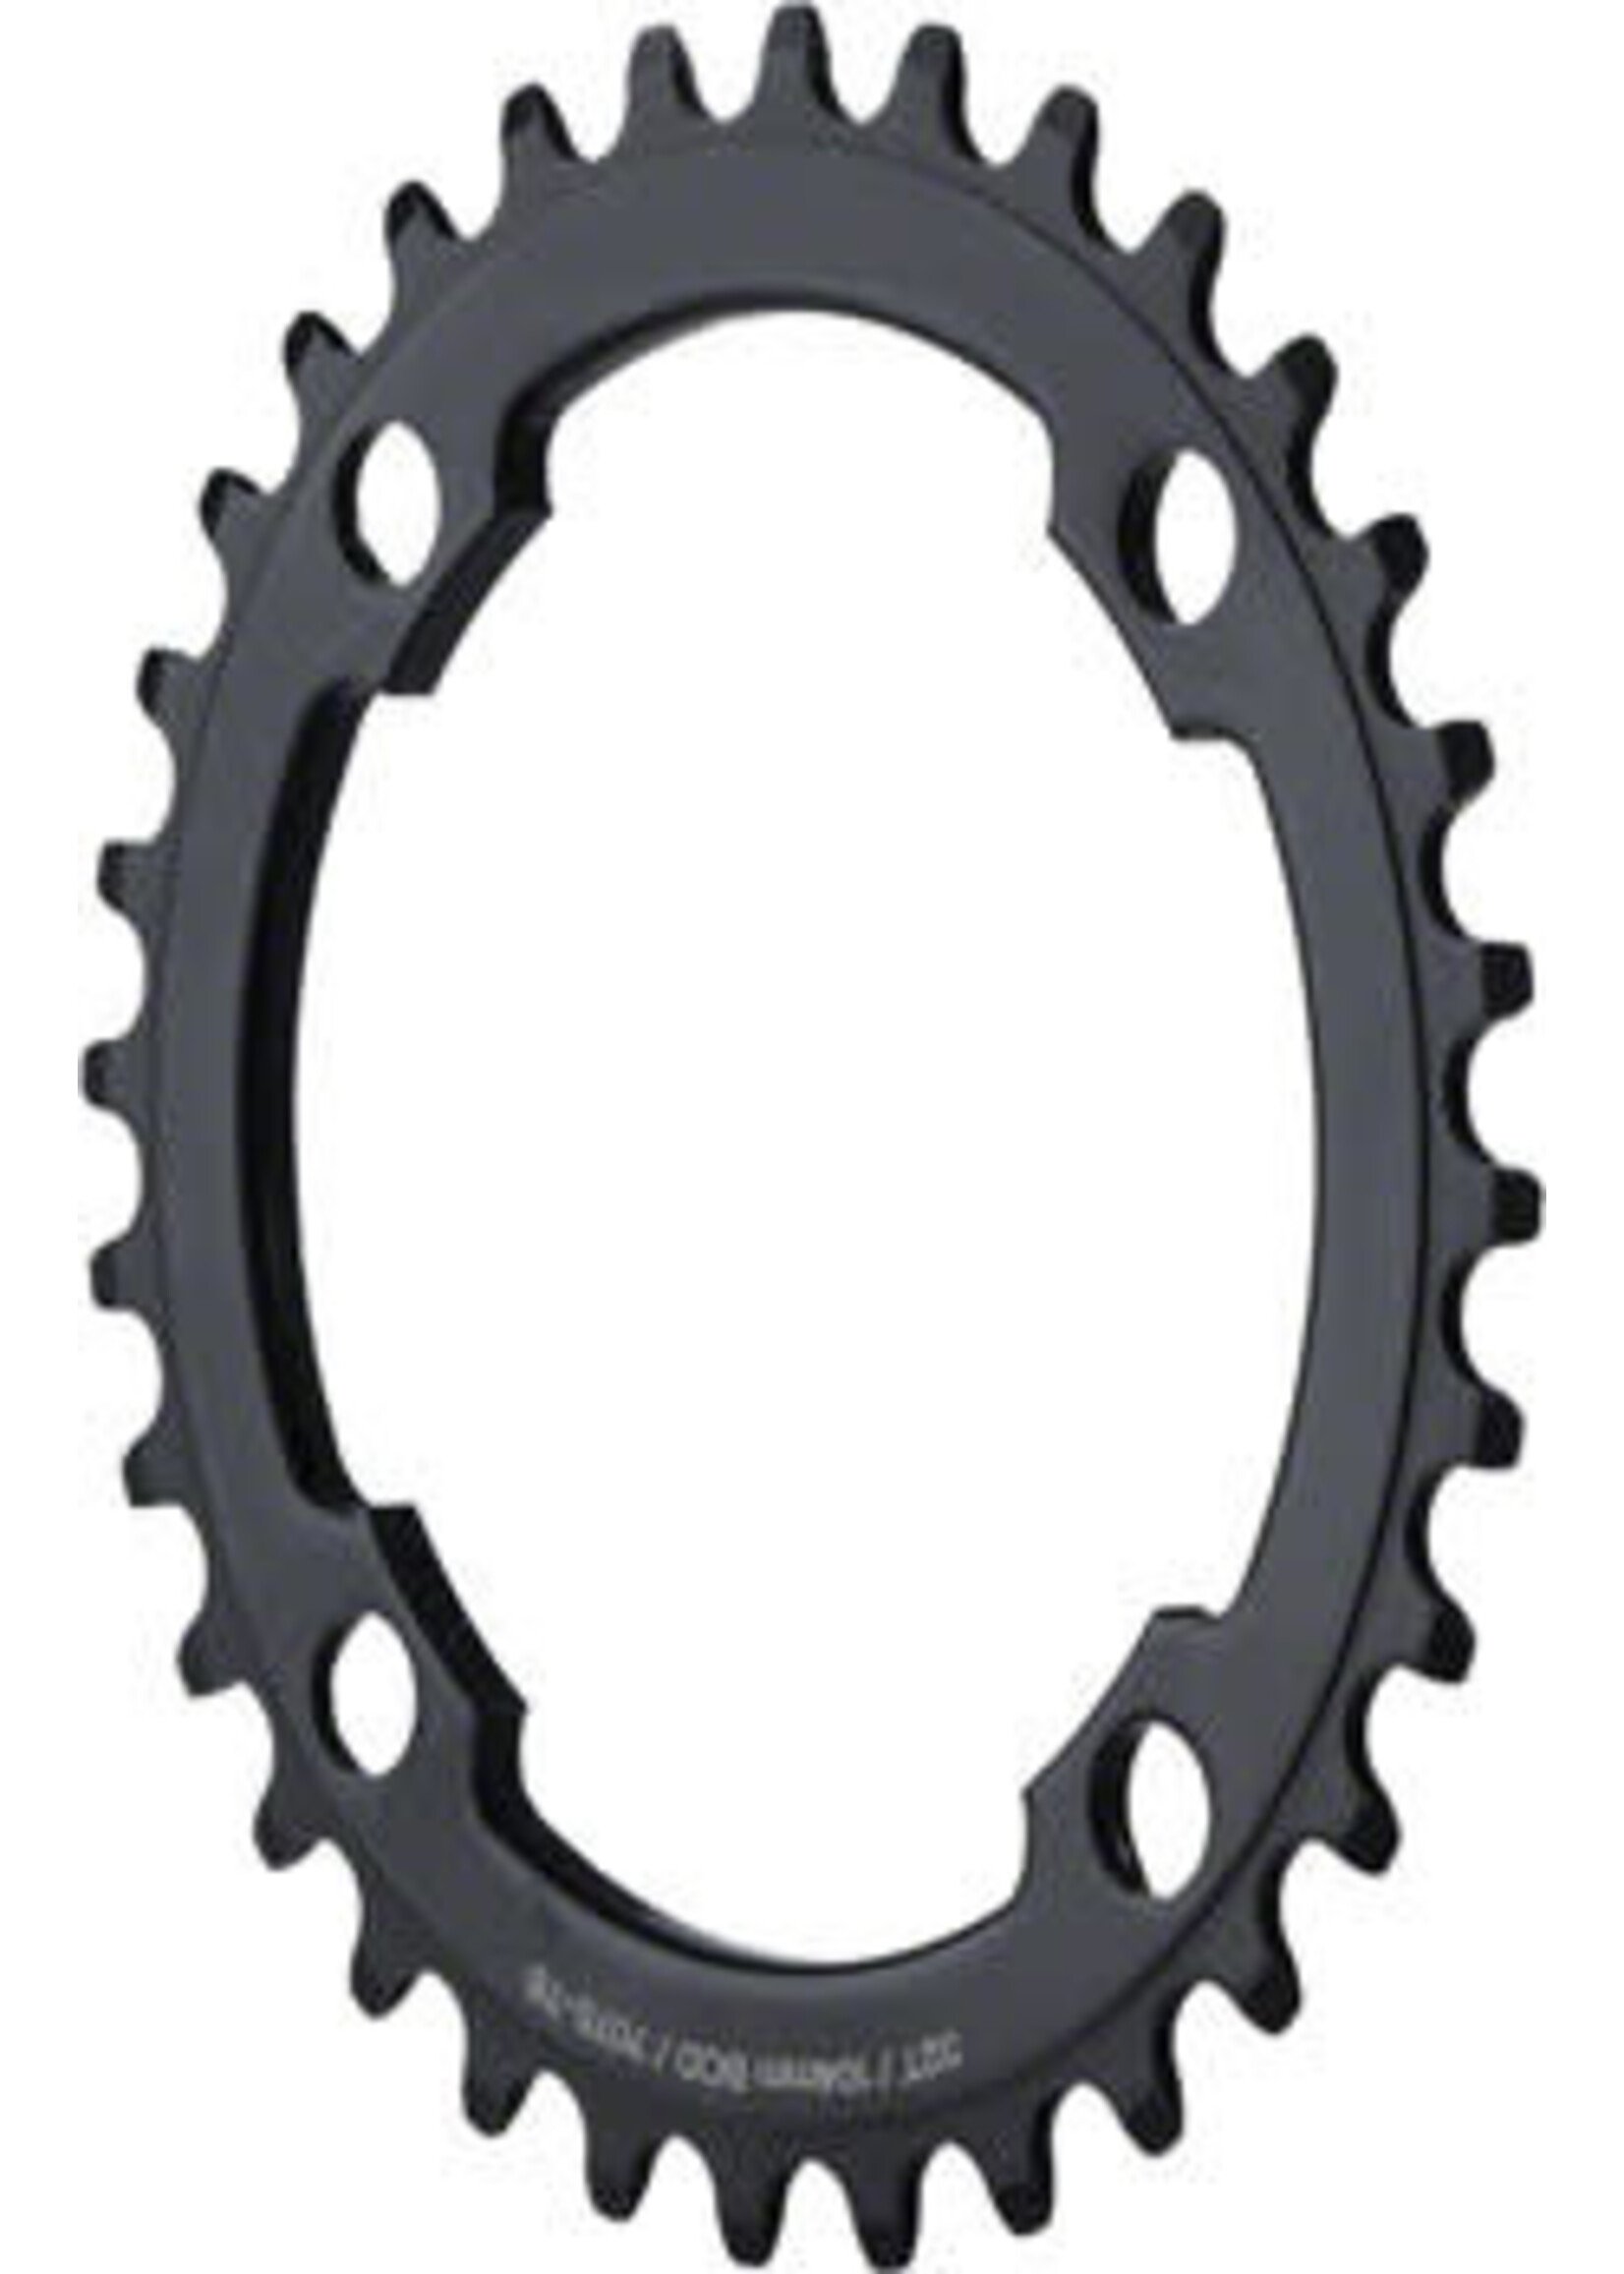 Dimension Dimension Chainring - 32T, 104mm BCD, Middle, Black